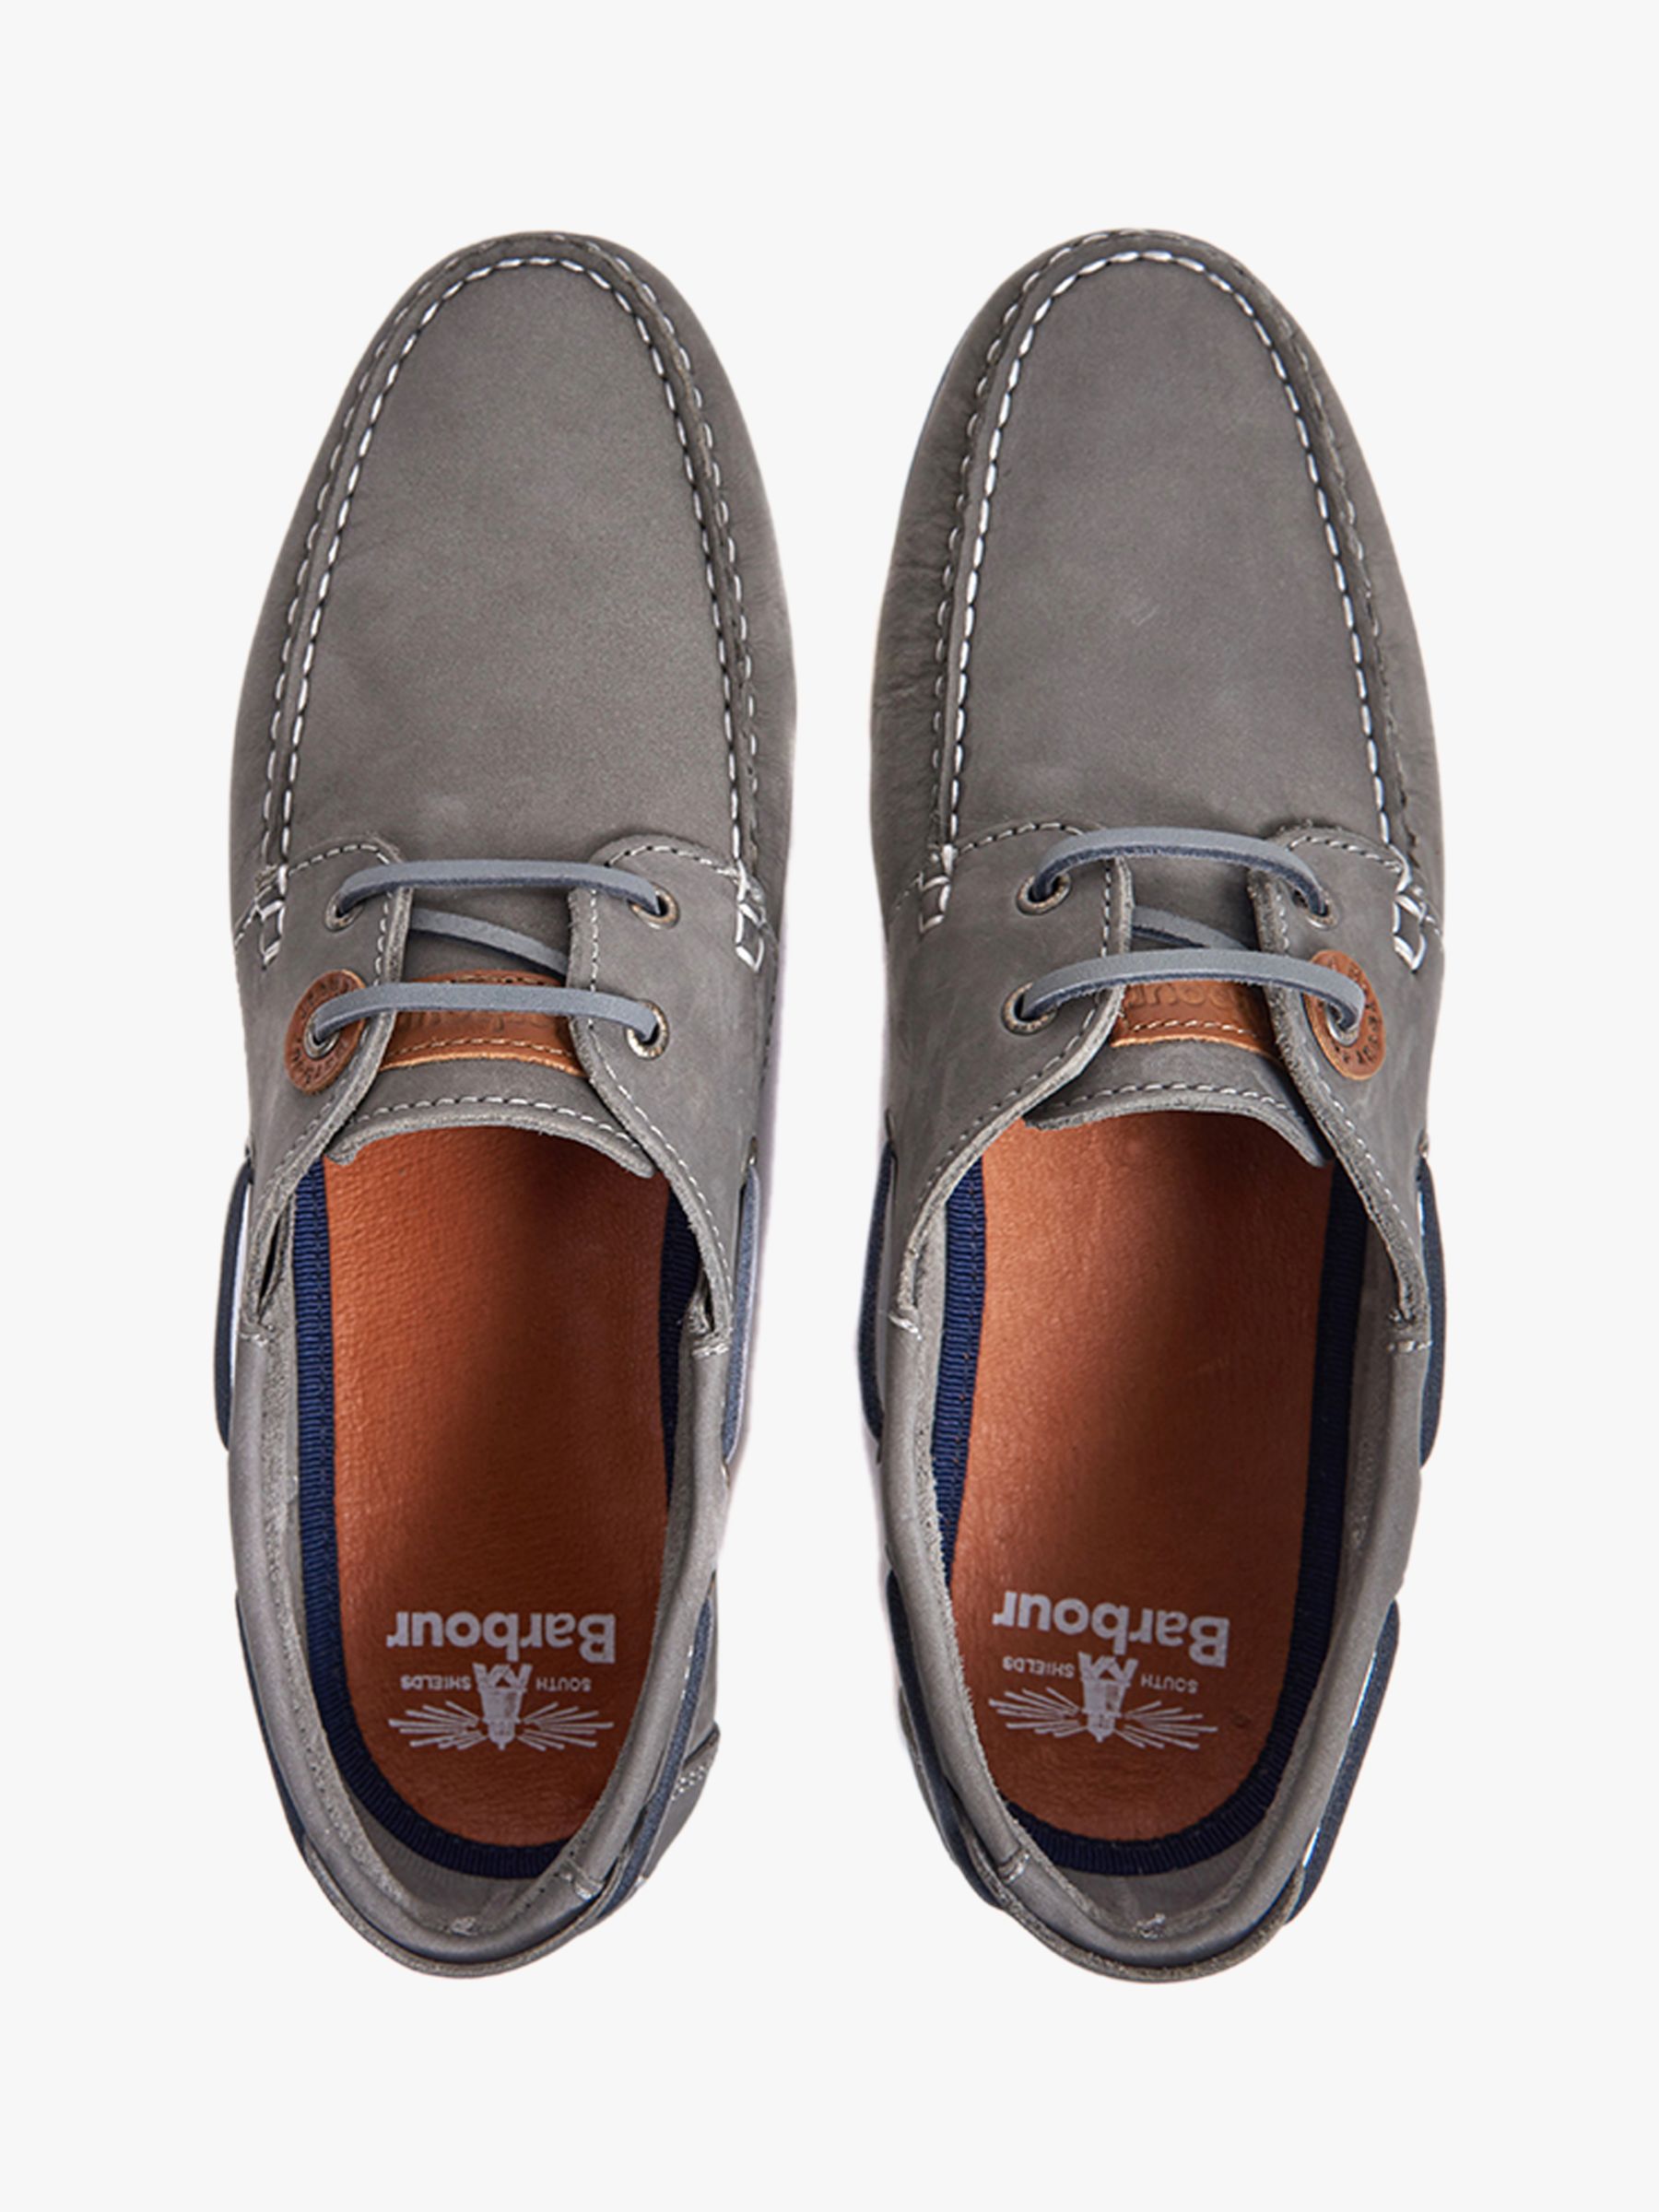 capstan boat shoes